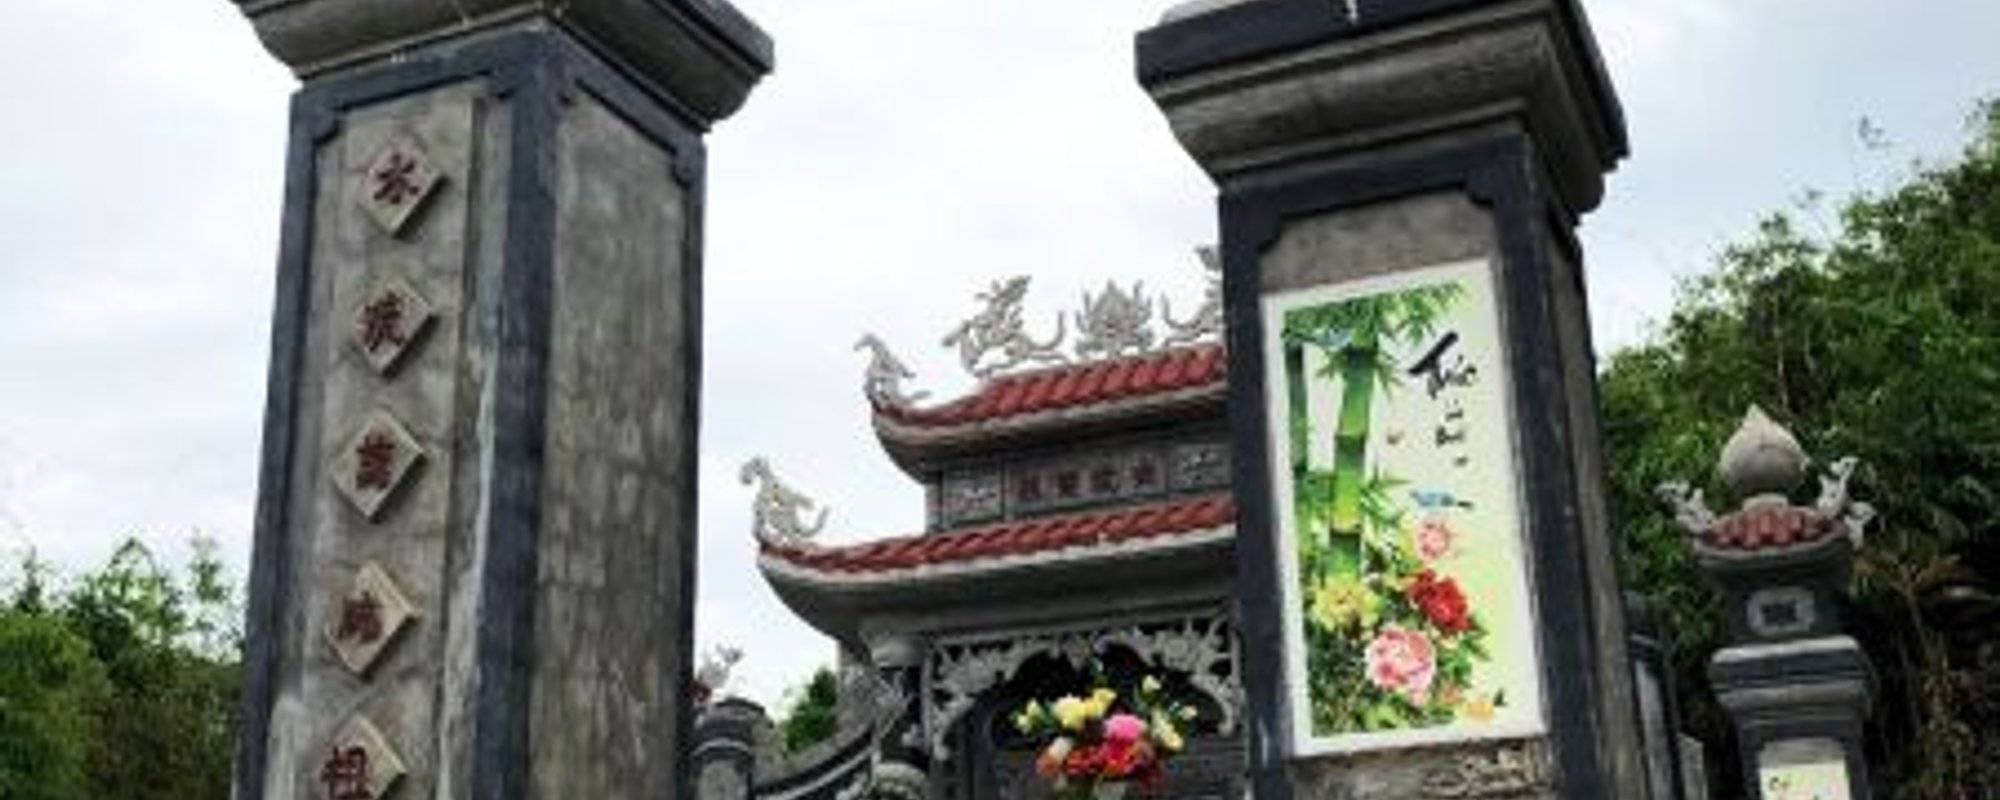 Travel Pro Places of Interest #175: A Cemetery in Rural Vietnam! Part One (8 Photos)